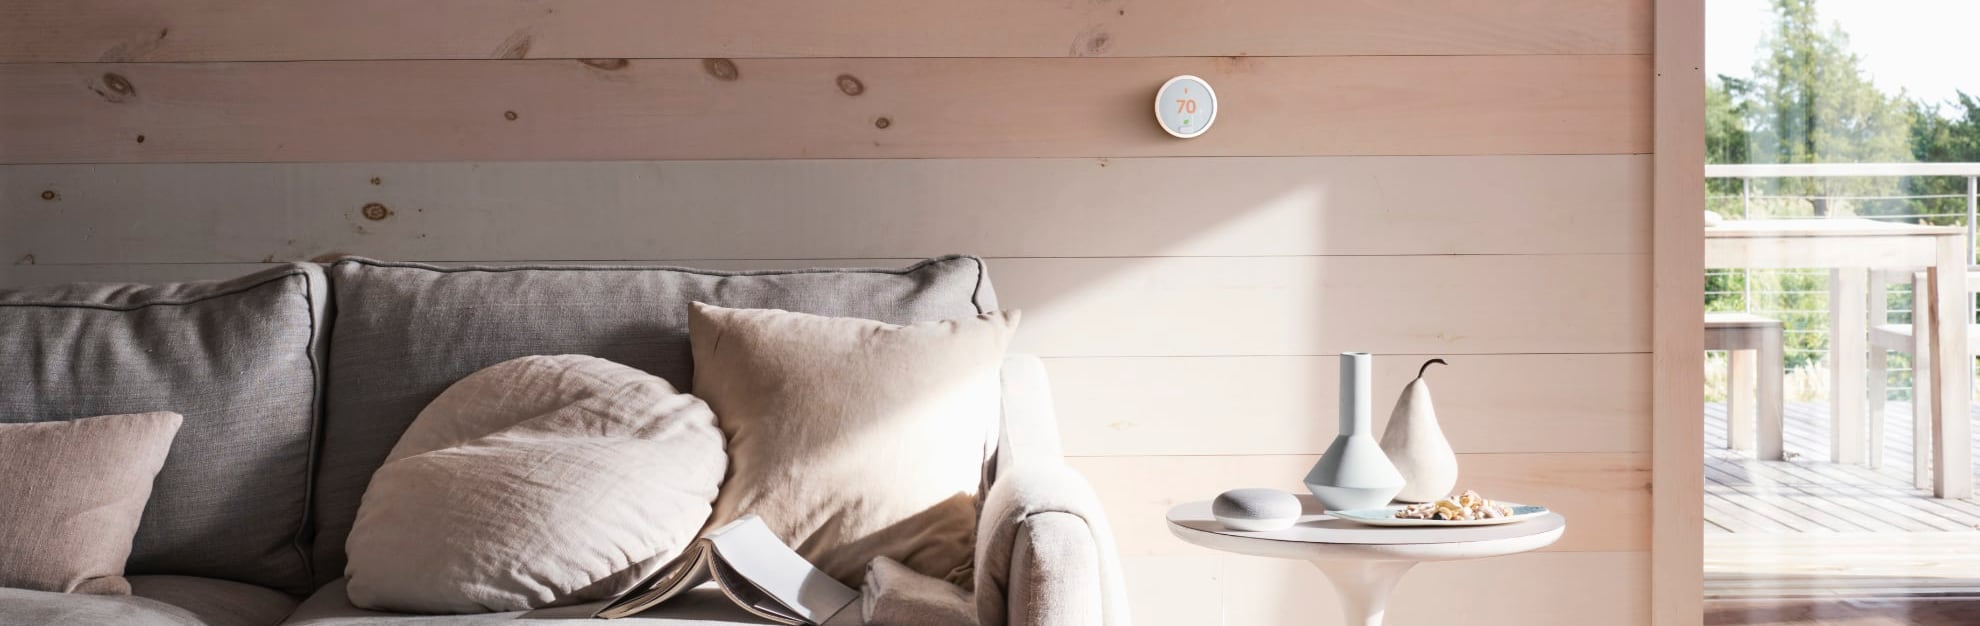 Vivint Home Automation in Chandler